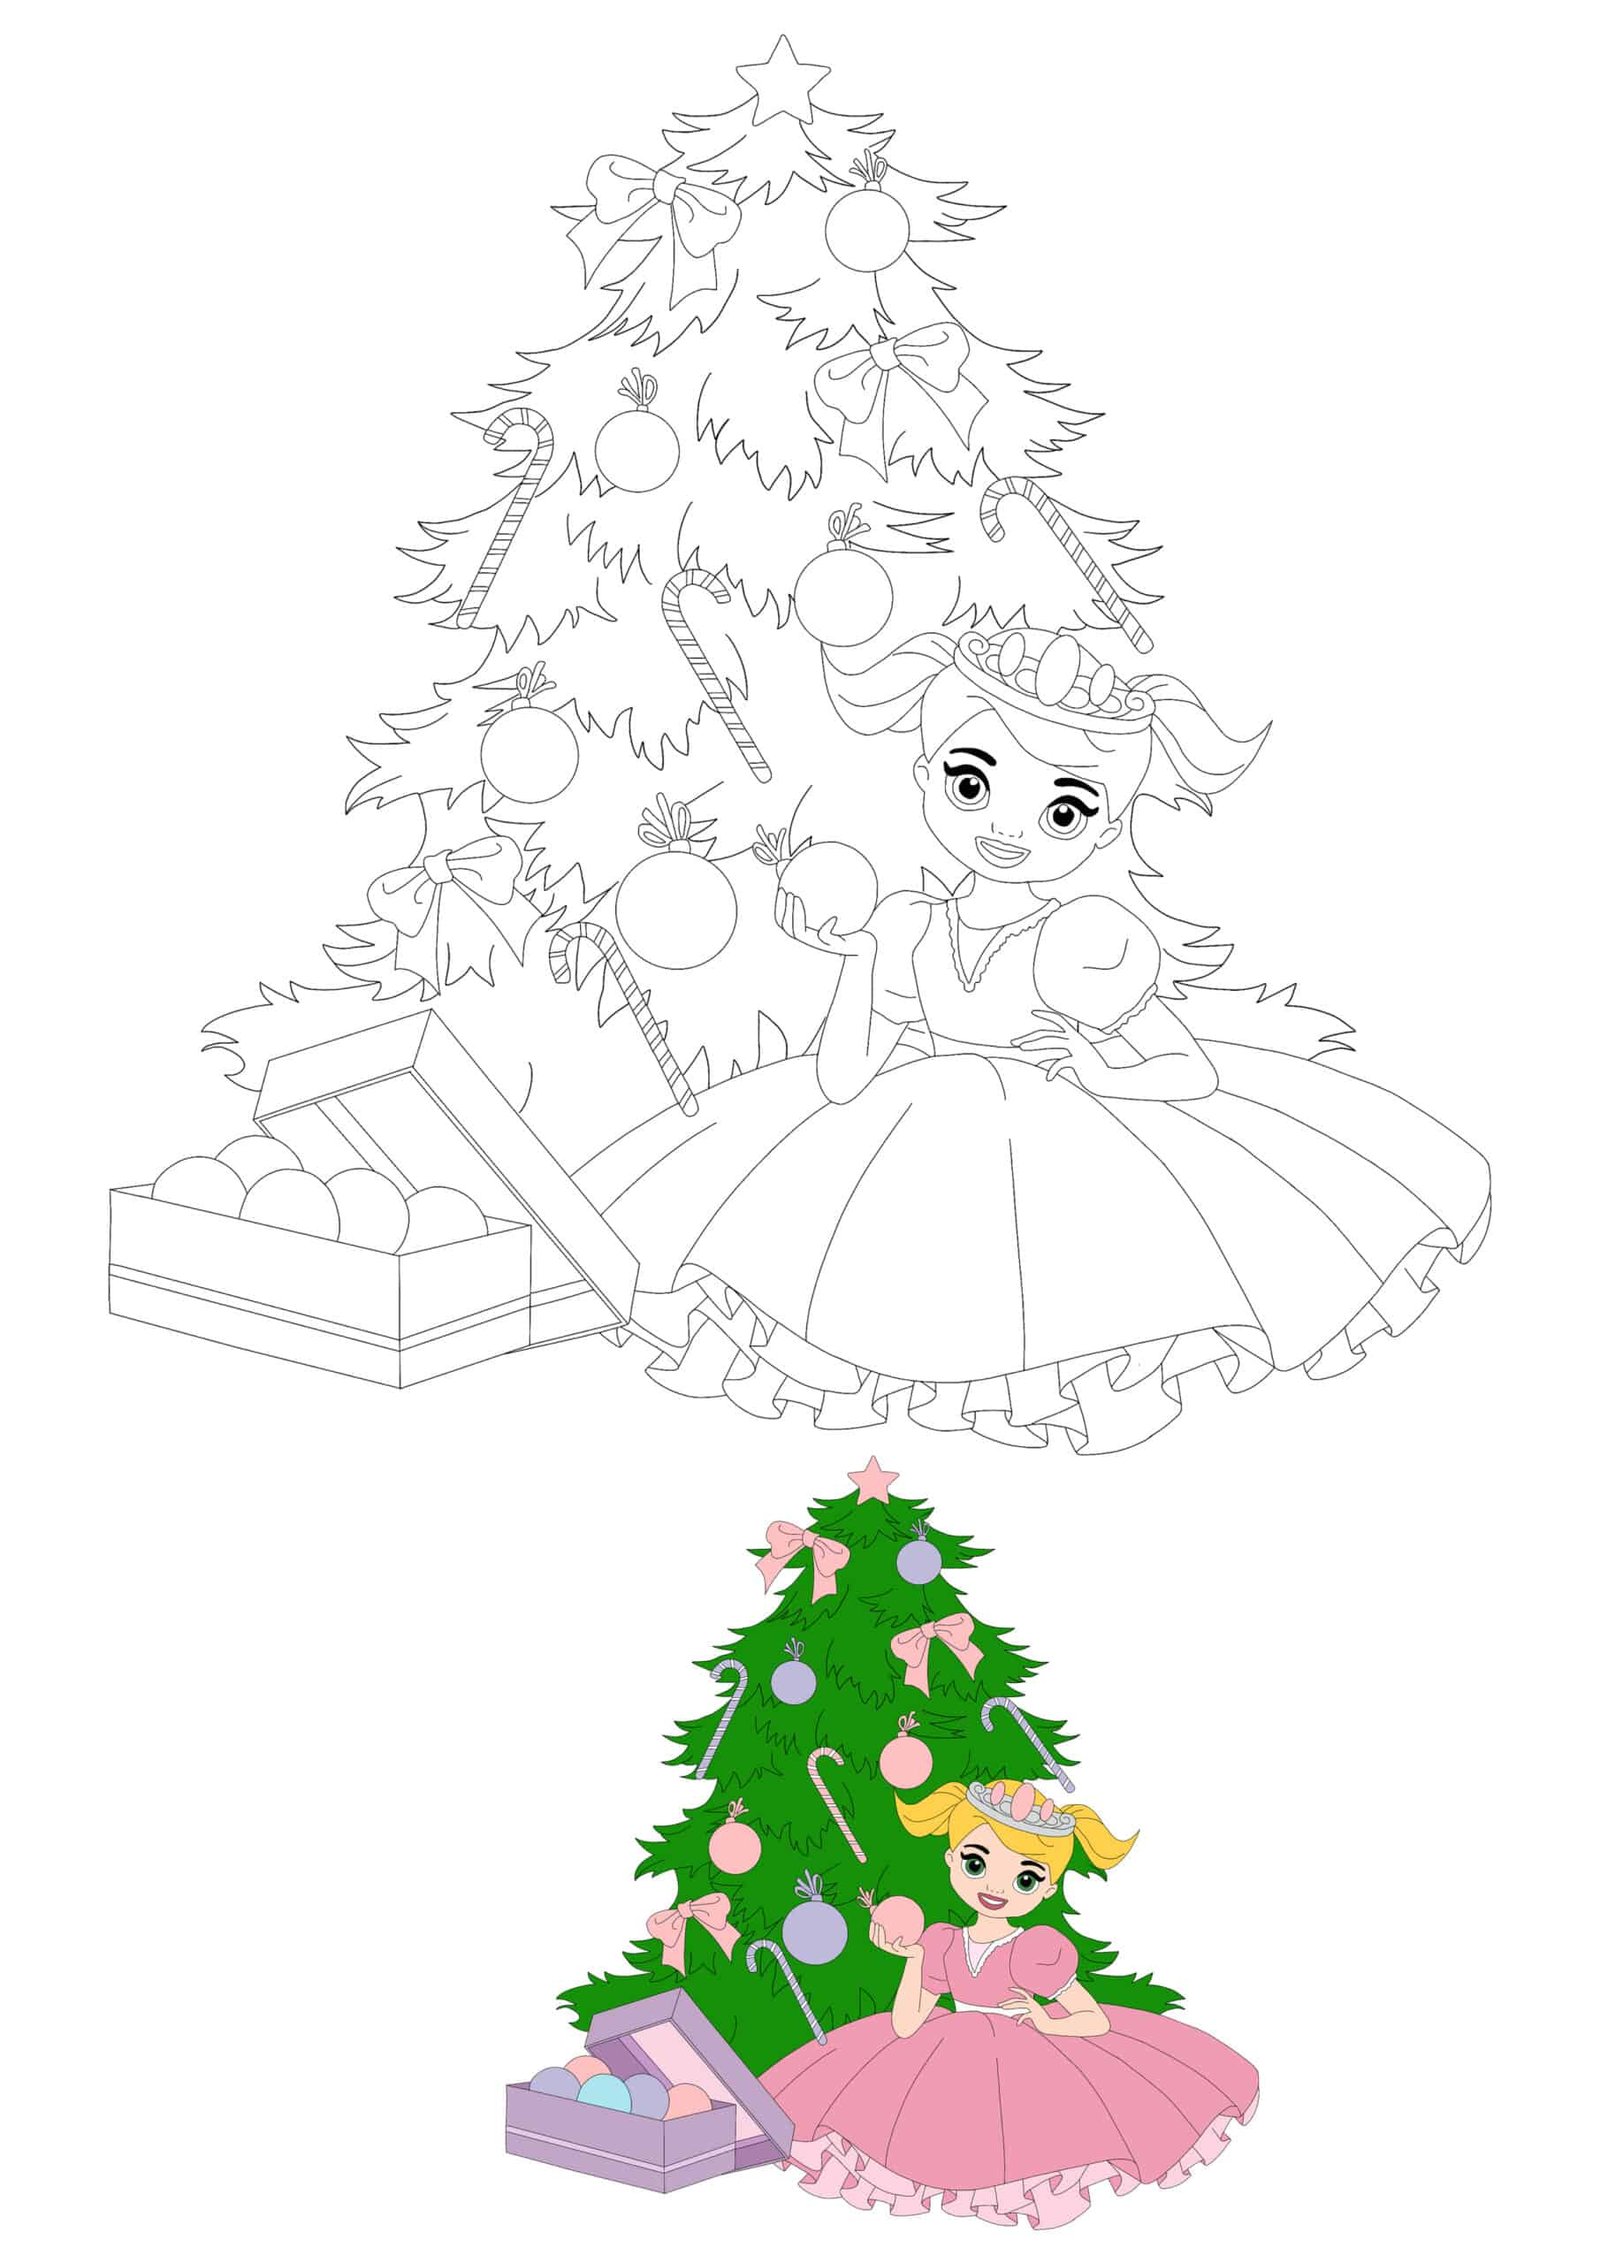 Little Princess Decorating Christmas Tree coloring page with coloring preview